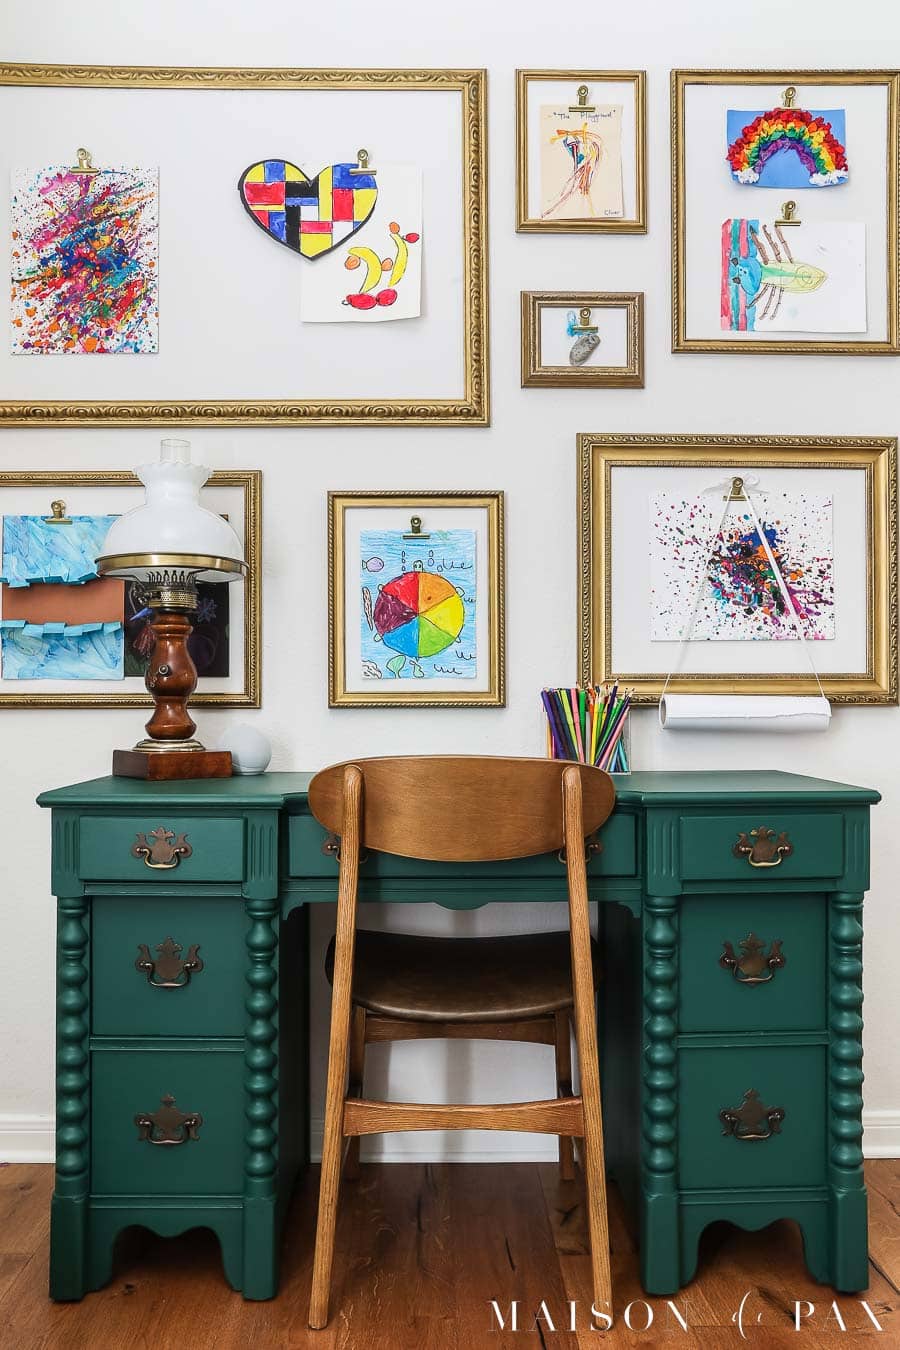 antique desk painted green with vintage wood chair and colorful artwork above